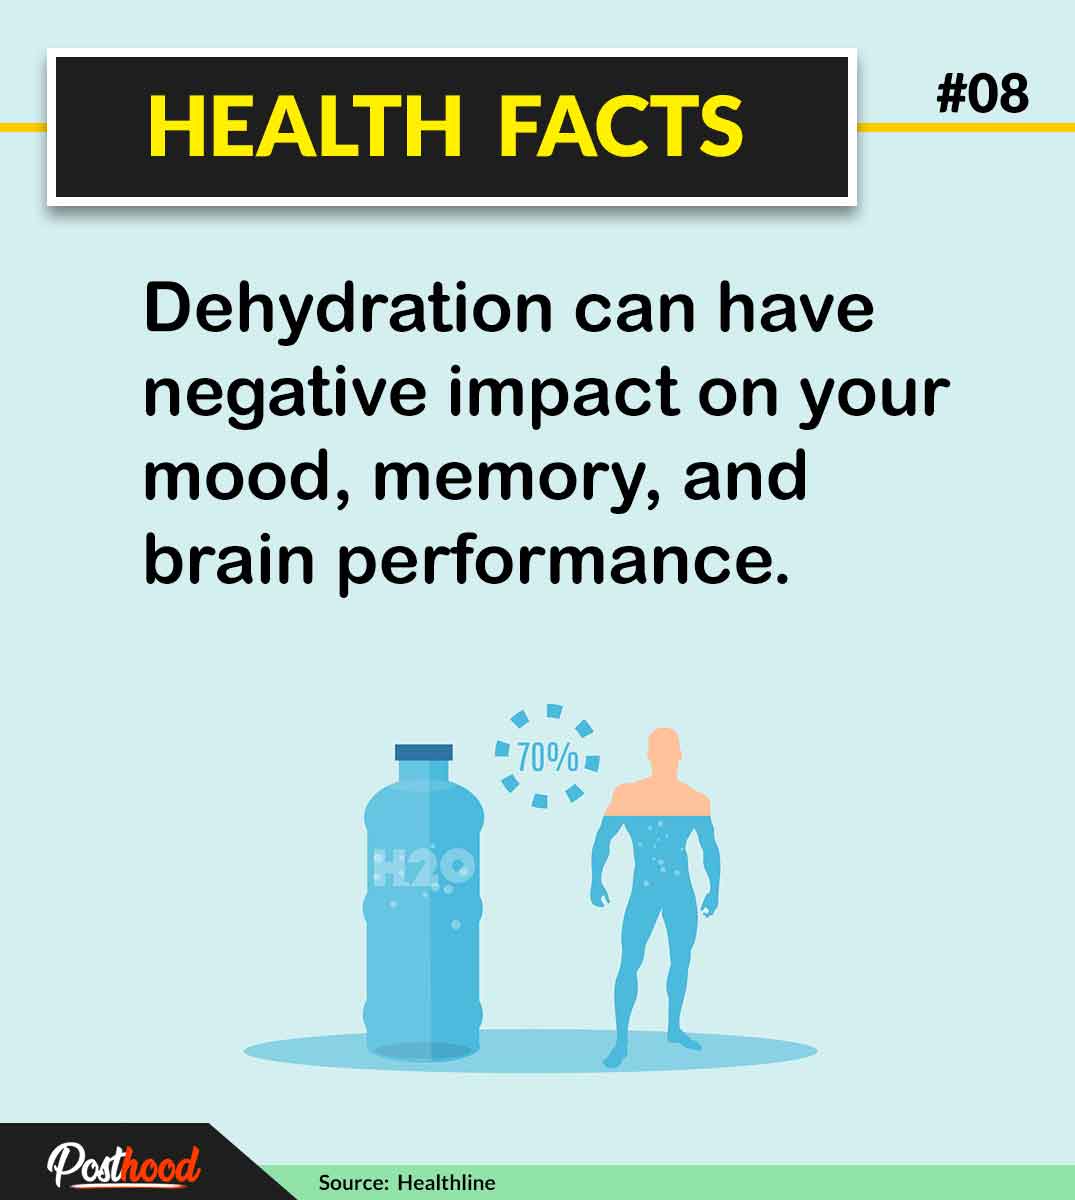 Do you know these unknown health facts about drinking water? Improve your health and wellbeing with these great water tips.